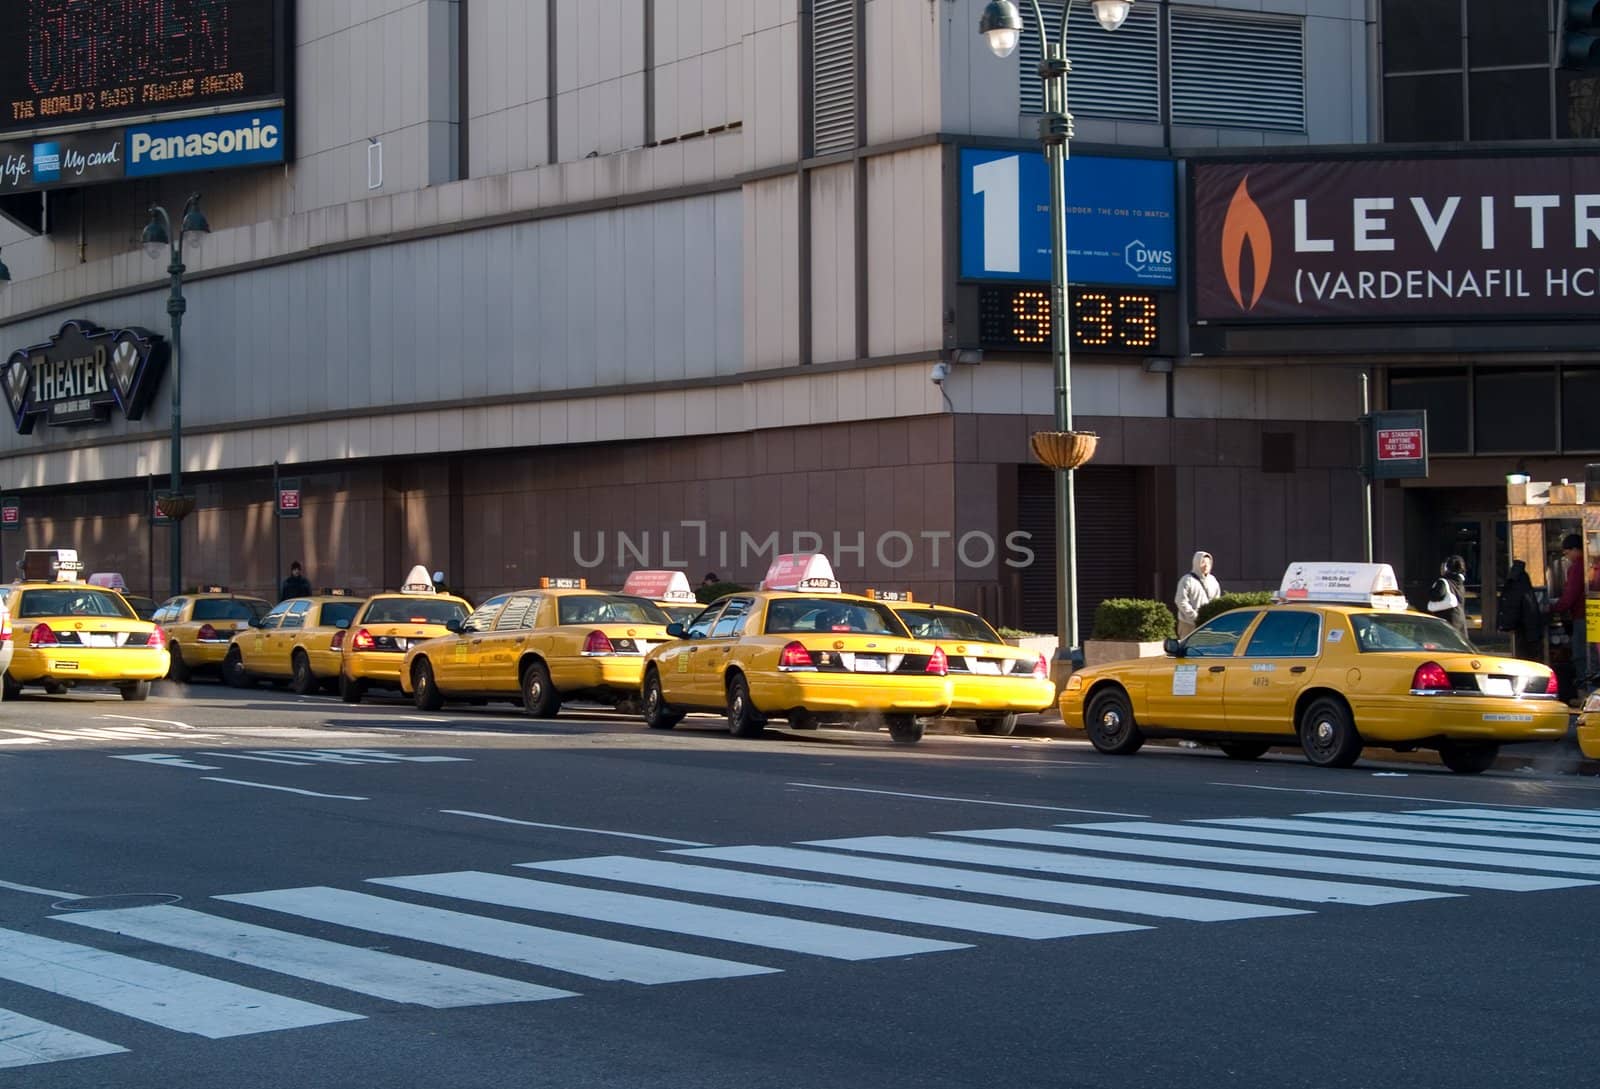 Lots of taxis waiting for riders.